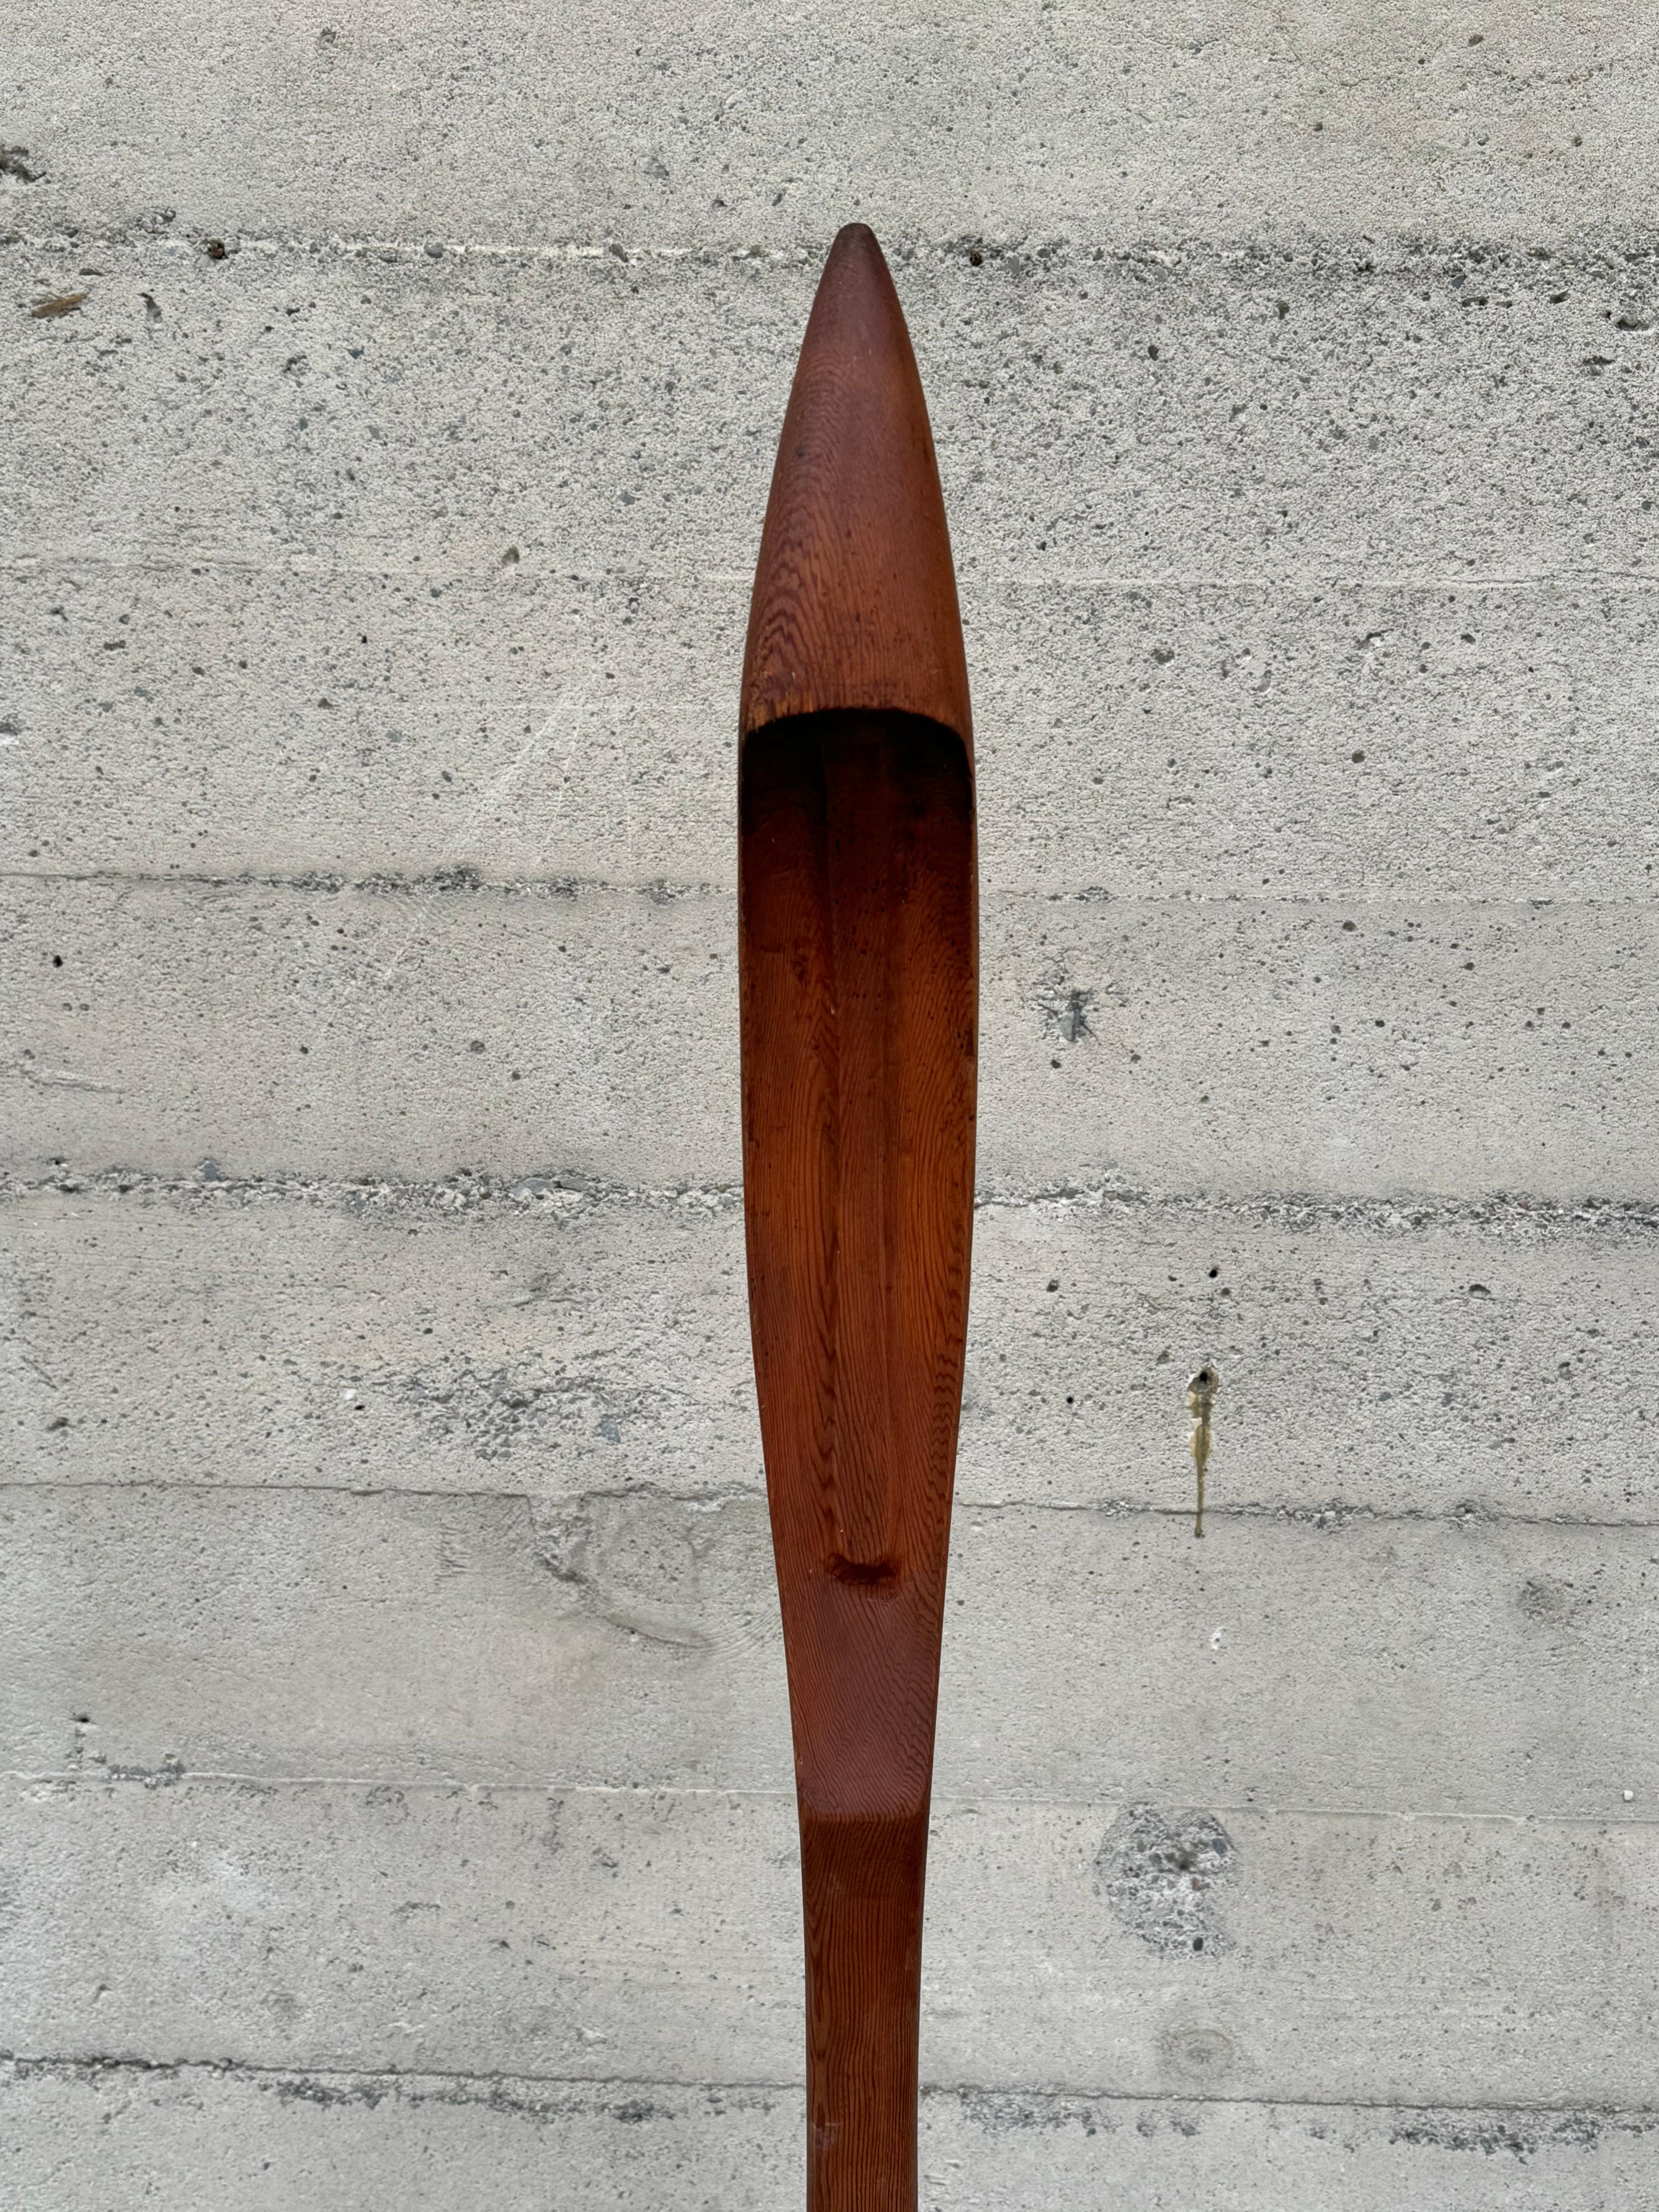 Hand carved redwood figurative abstract  totem by Bay Area artist Joseph John Hudner (1909-1971) created in 1934. Hudner attended UC Berkeley, worked for the Federal Art Project during the 1930s and had an exhibition at the SFMA in 1935. The piece